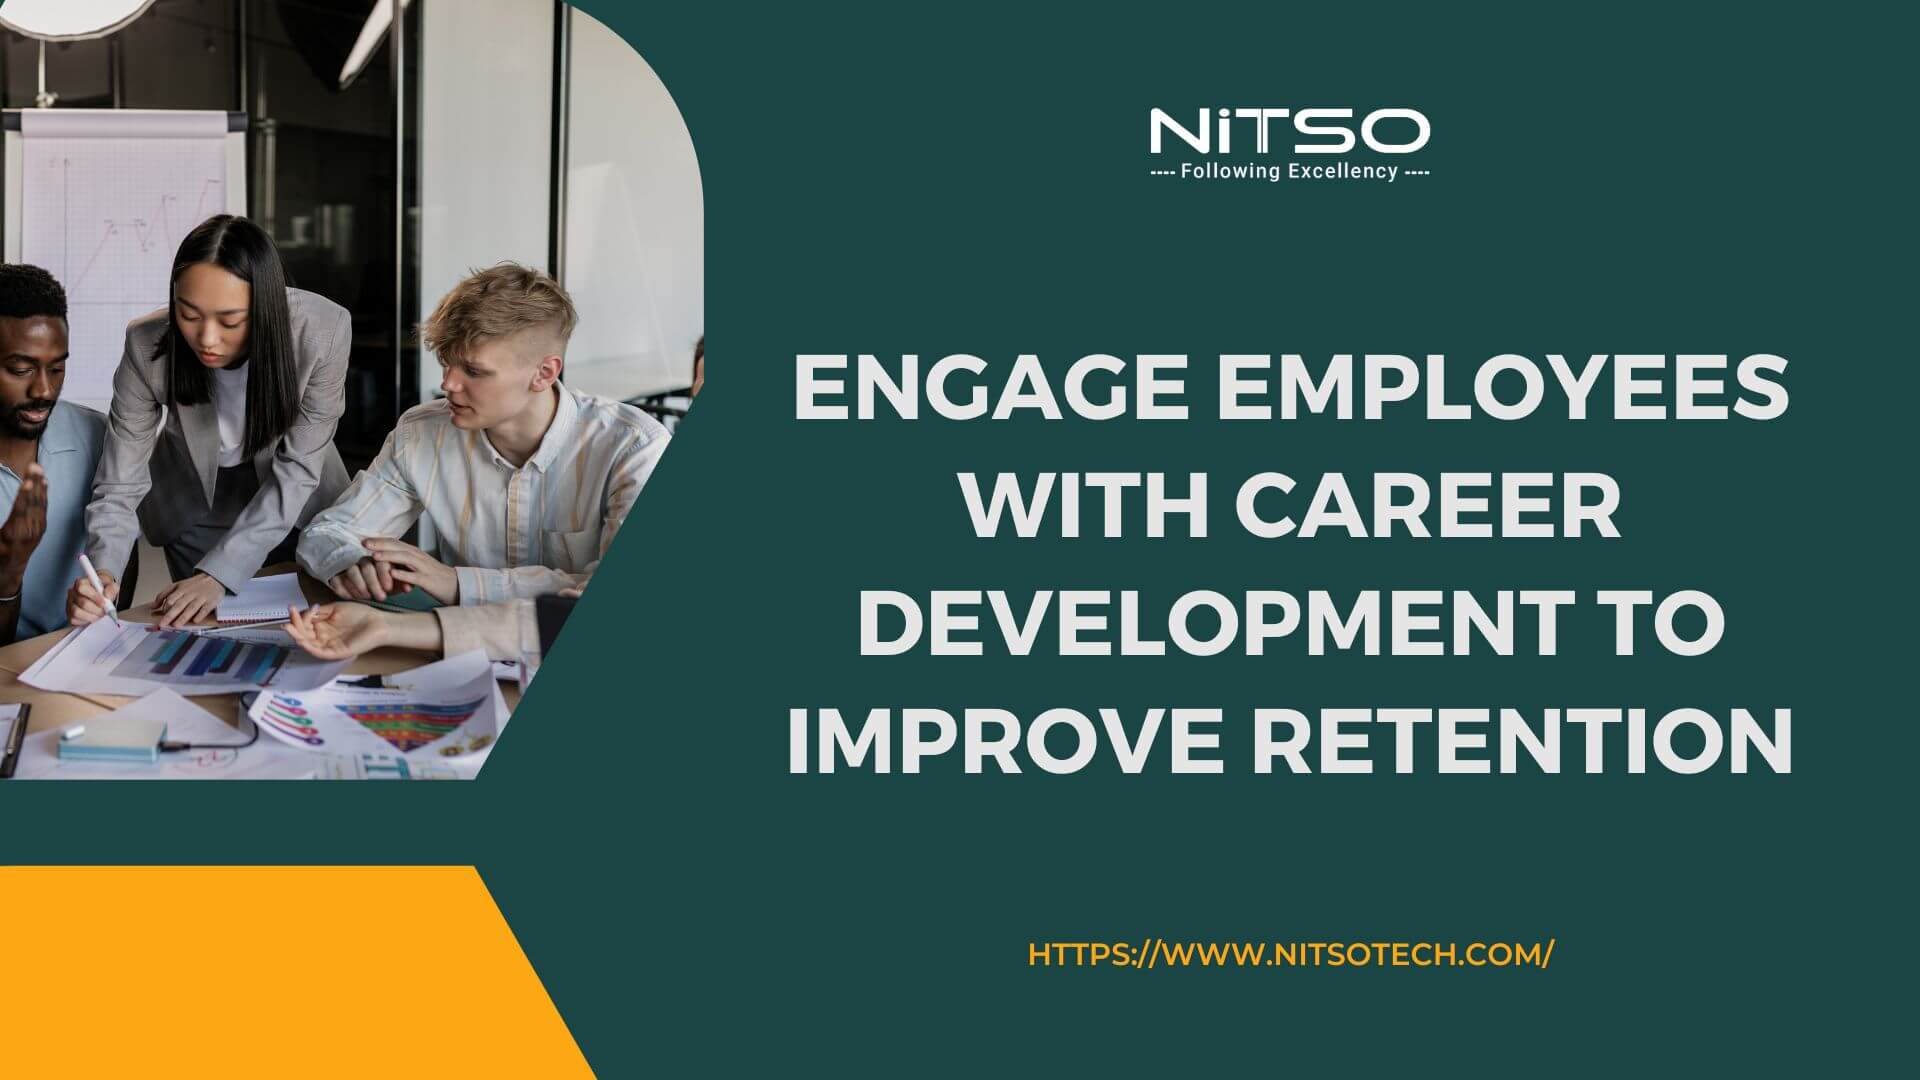 Engage Employees with Career Development to Improve Retention